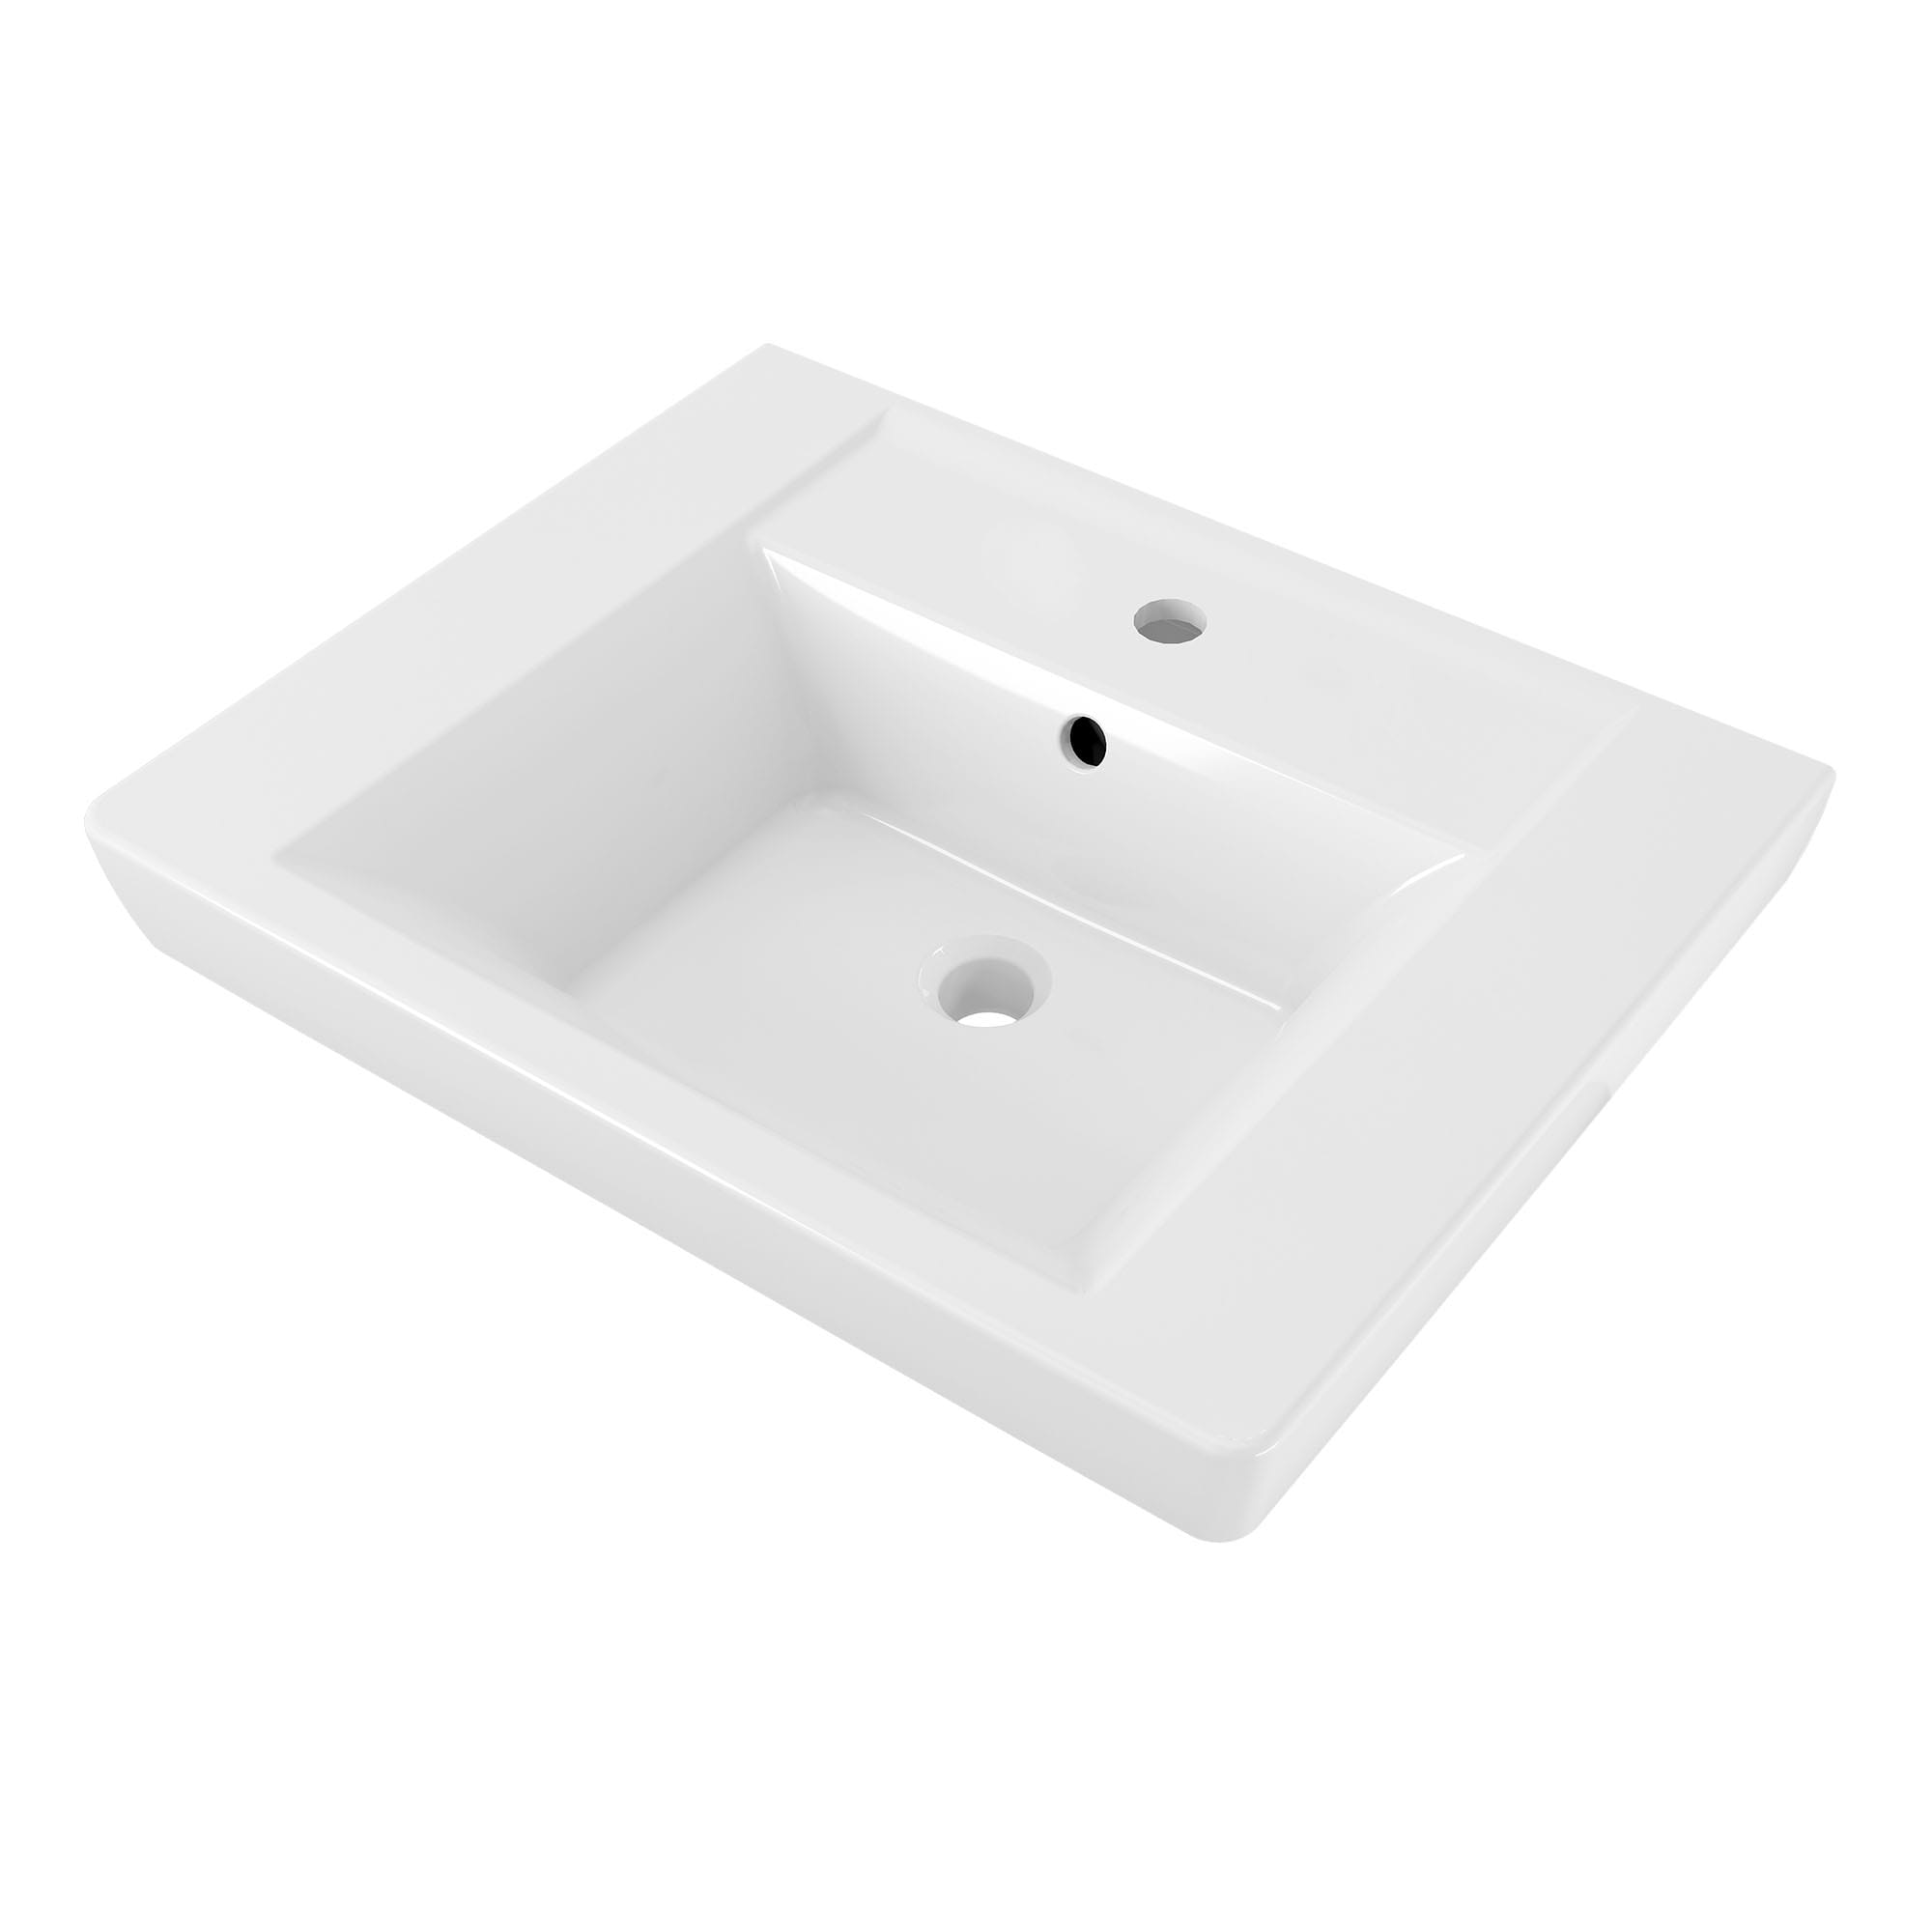 Boulevard Center Hole Only Pedestal Sink Top WHITE